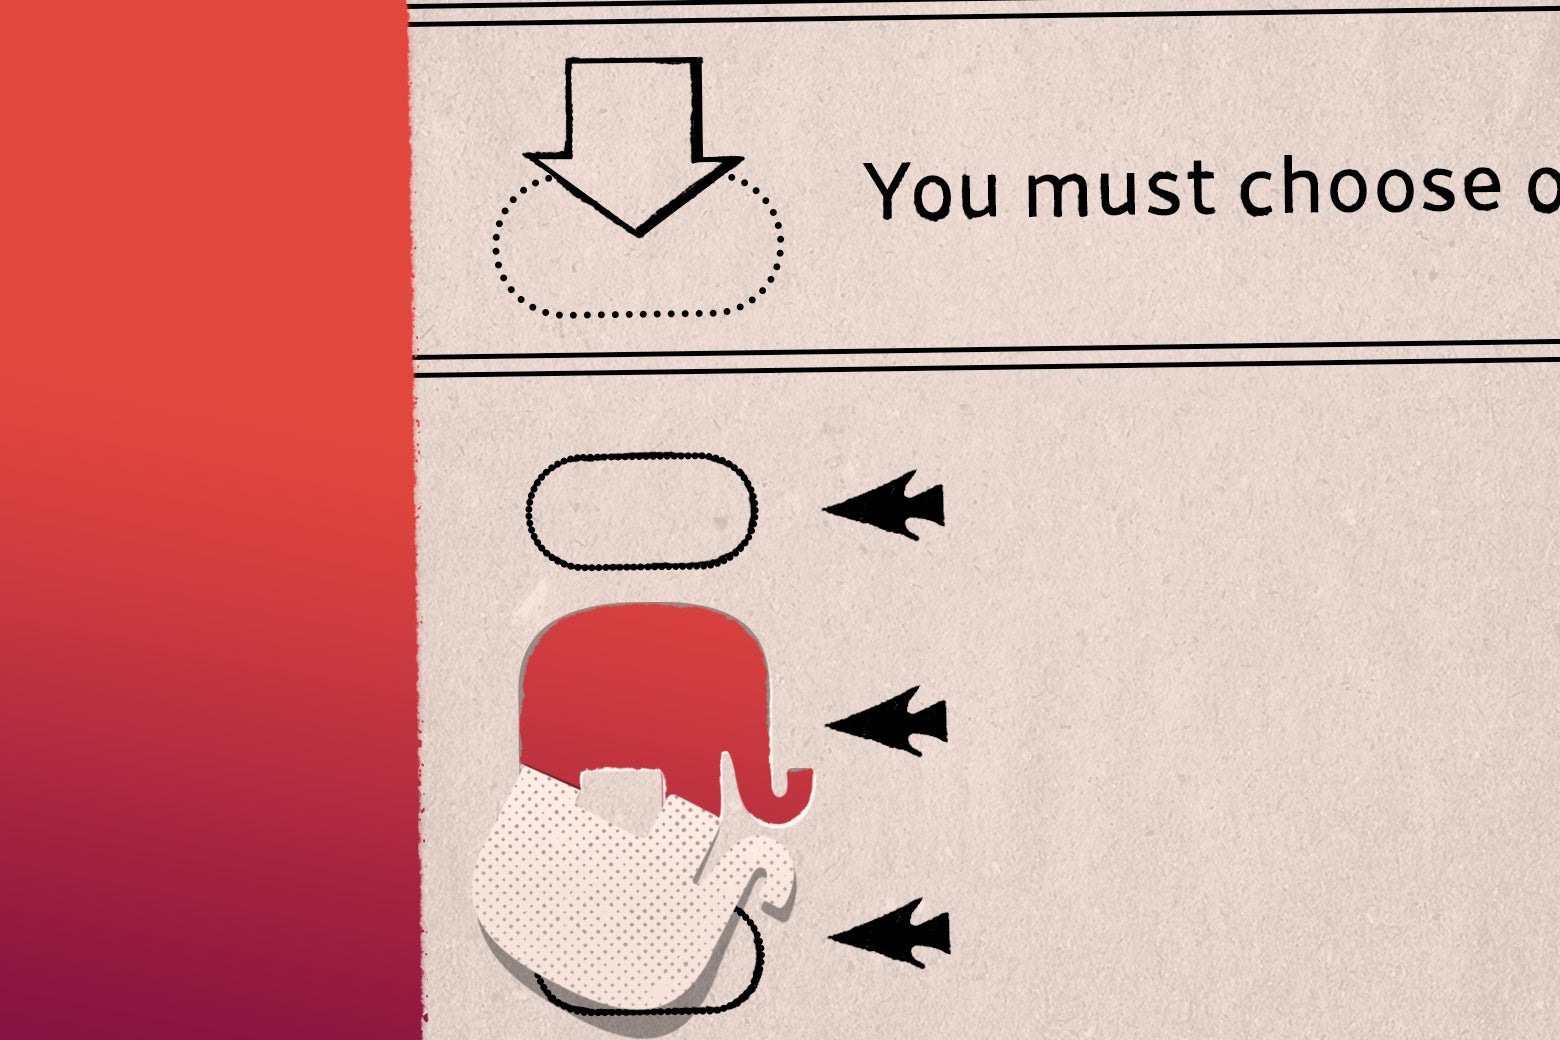 A slightly punched-out ballot chad shaped like an elephant.